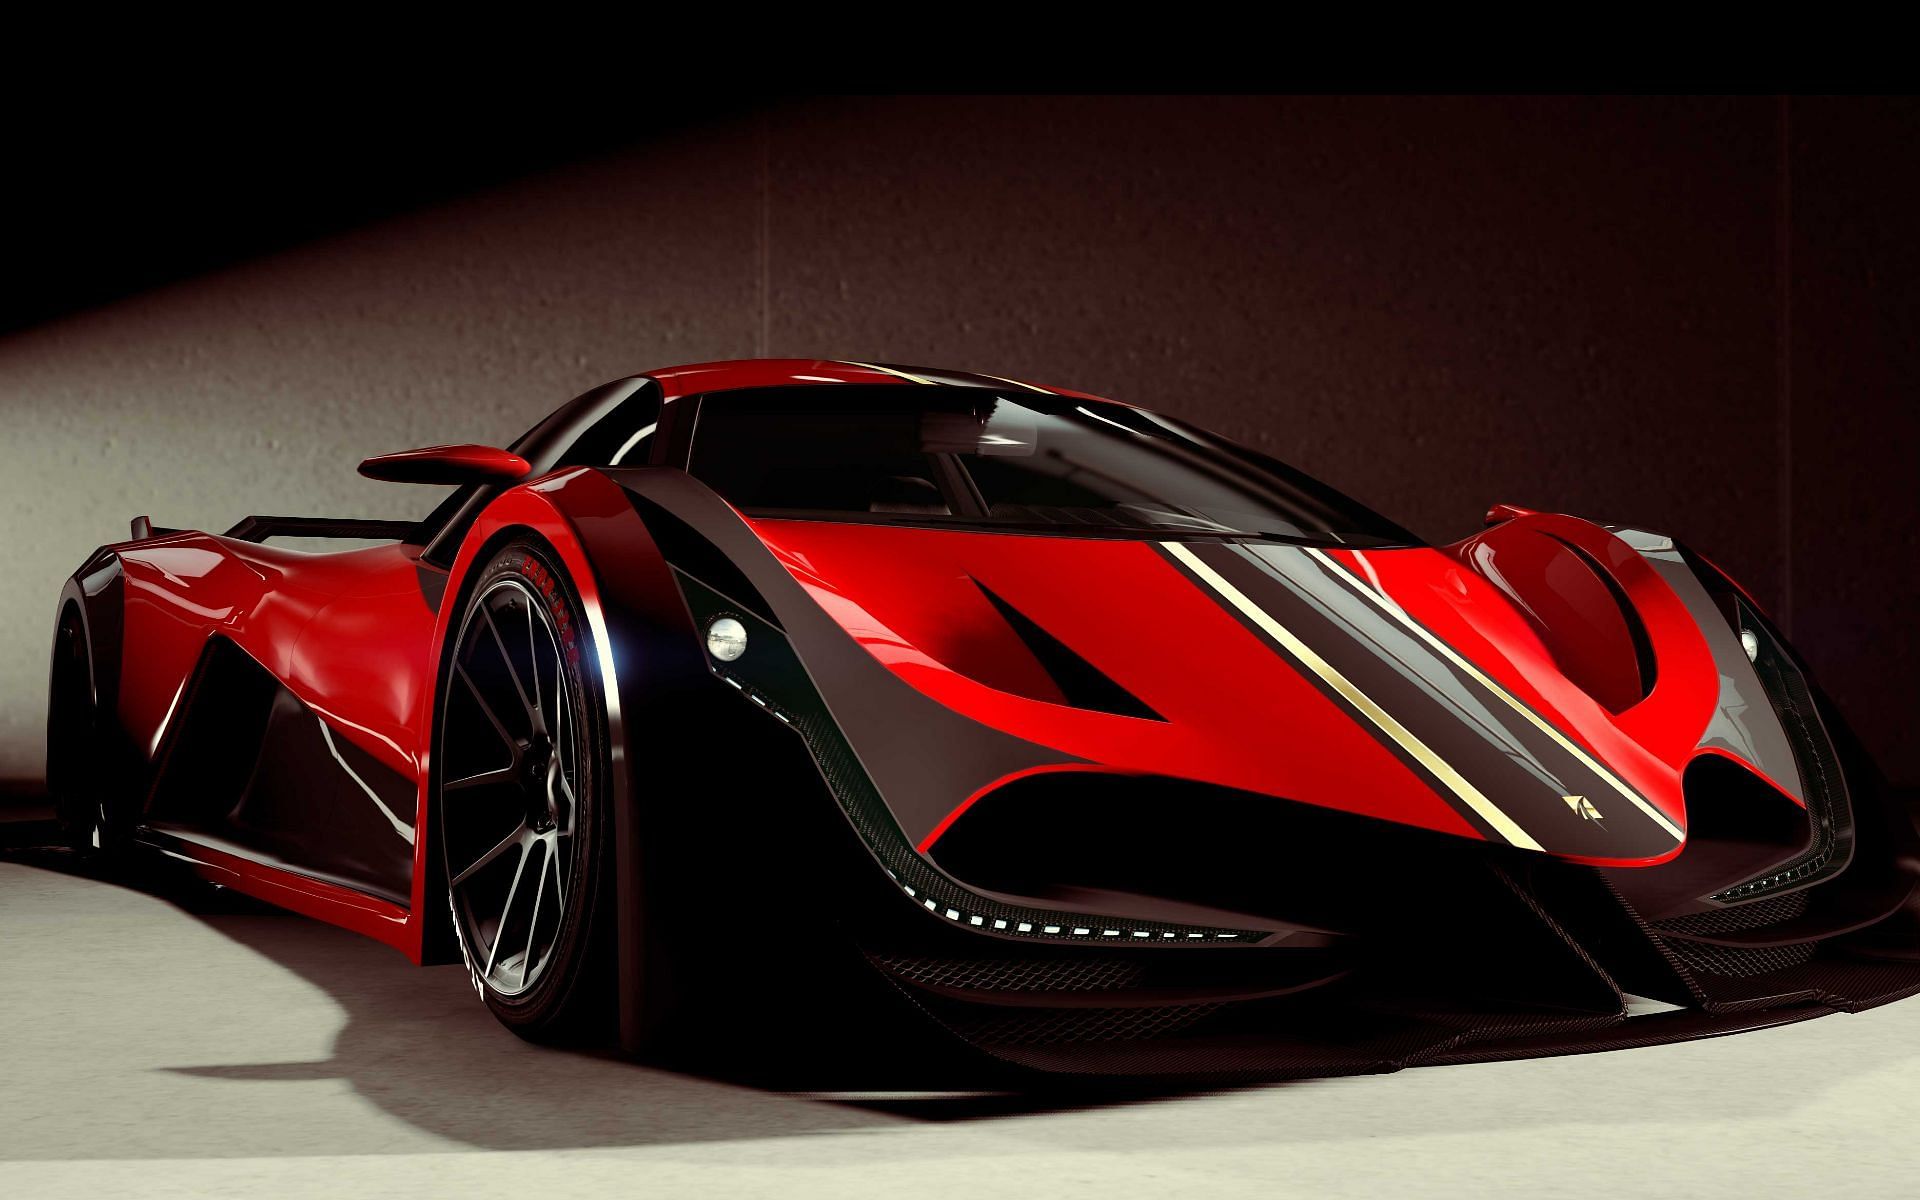 The Deveste Eight needs HSW Upgrades to be the fastest Super car in GTA Online (Image via Rockstar Games)